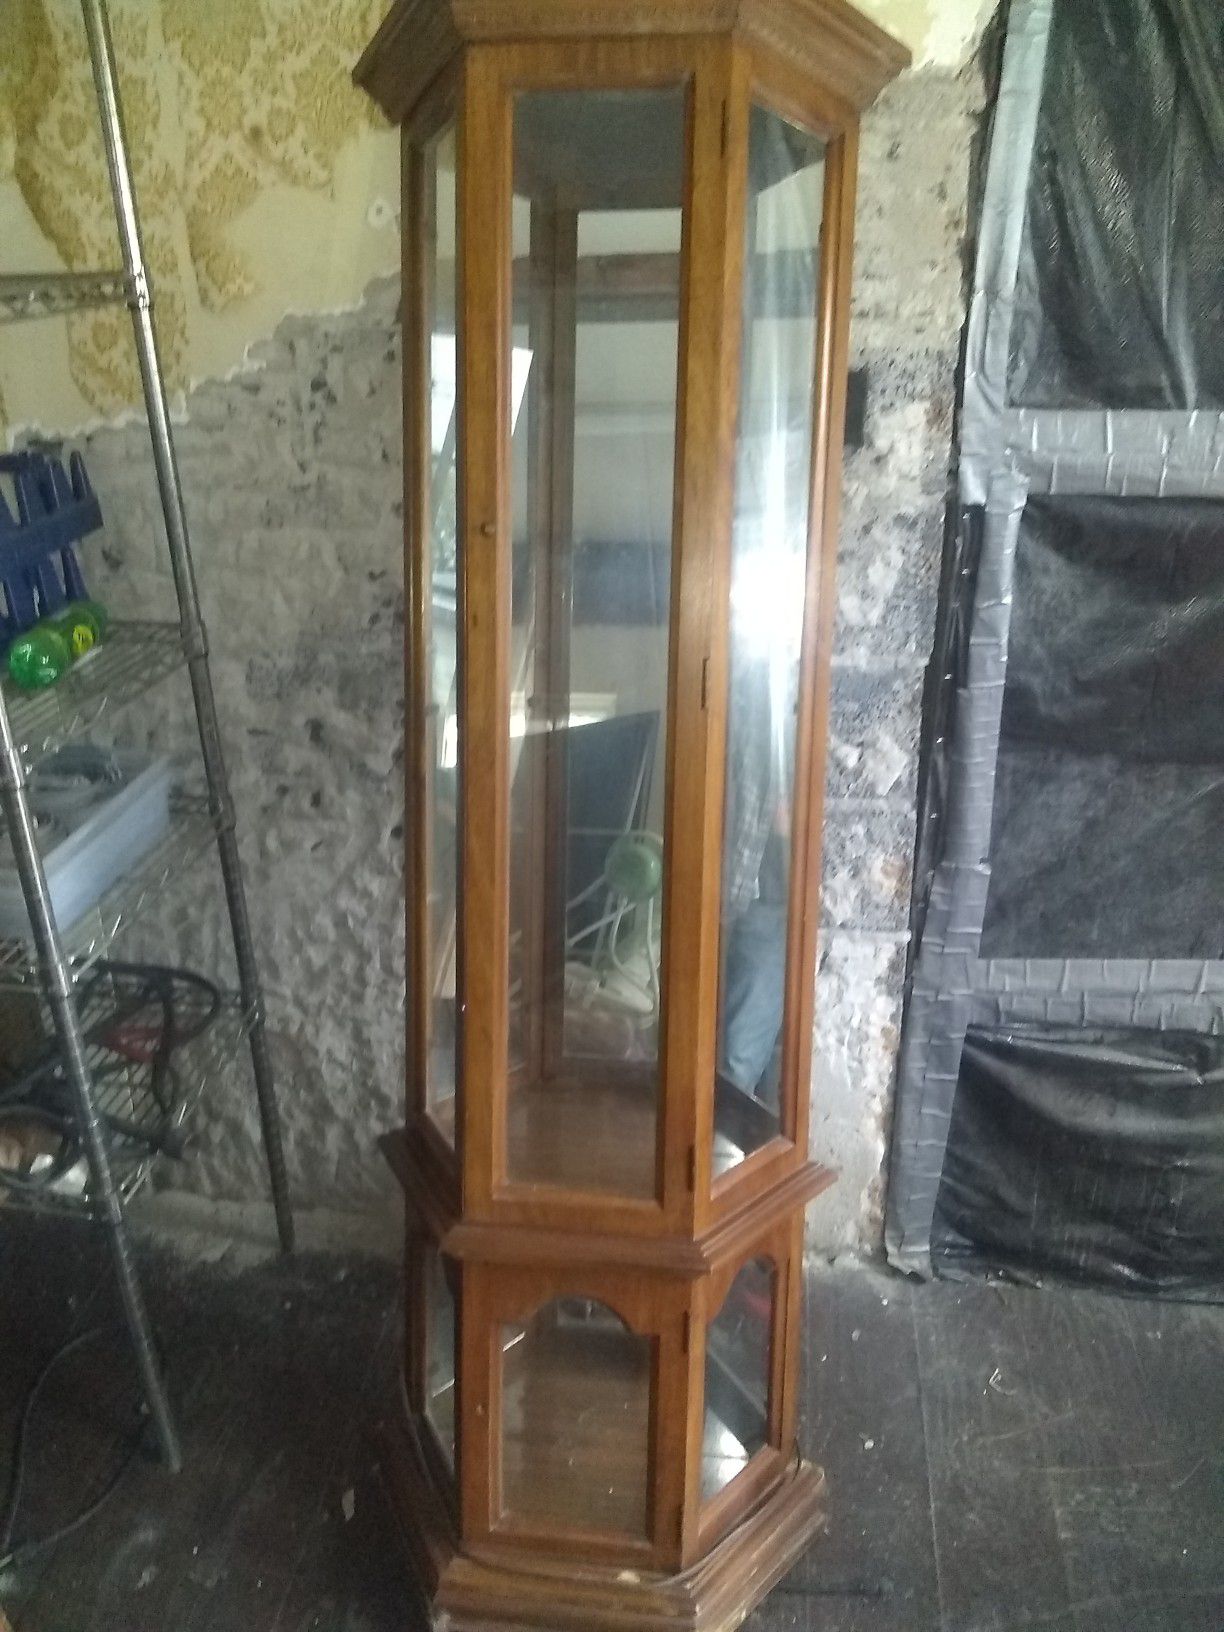 Display case/China cabinet